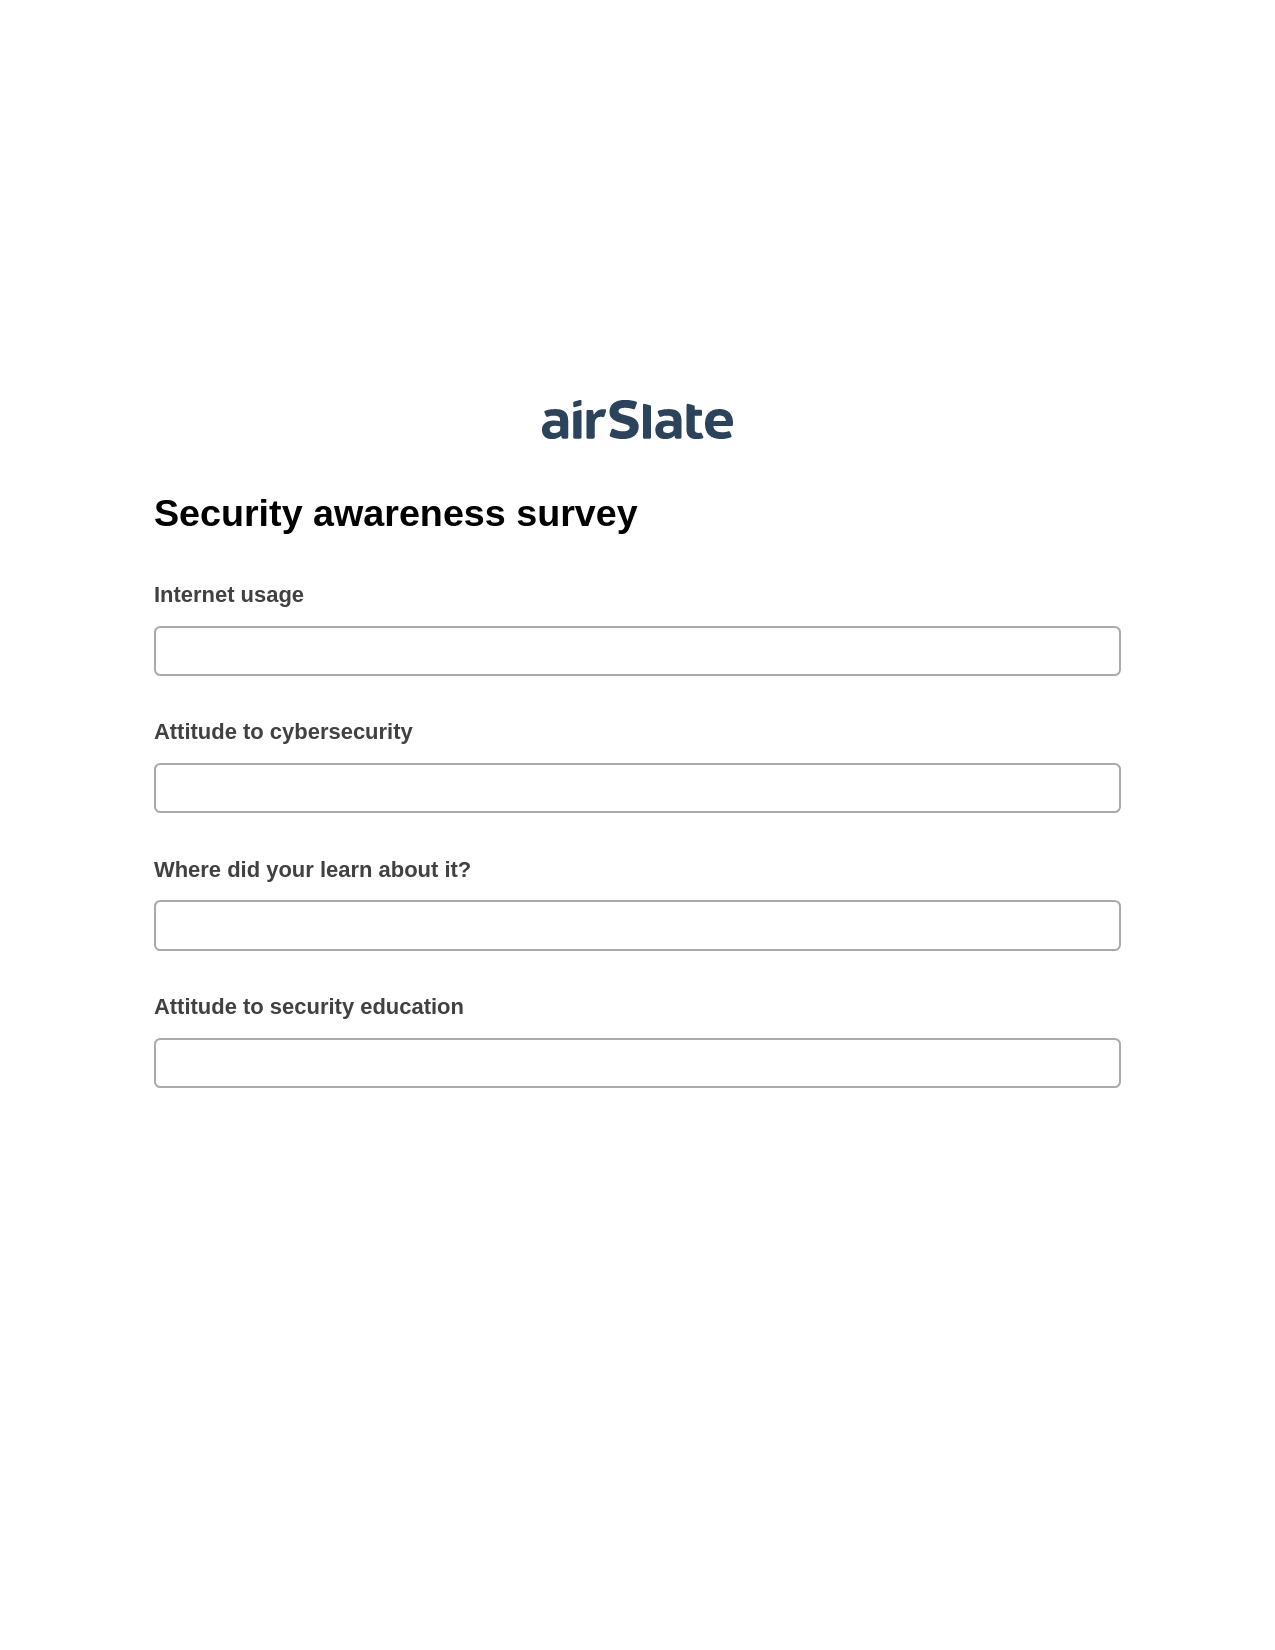 Security awareness survey Pre-fill from Excel Spreadsheet Bot, Roles Reminder Bot, Dropbox Bot